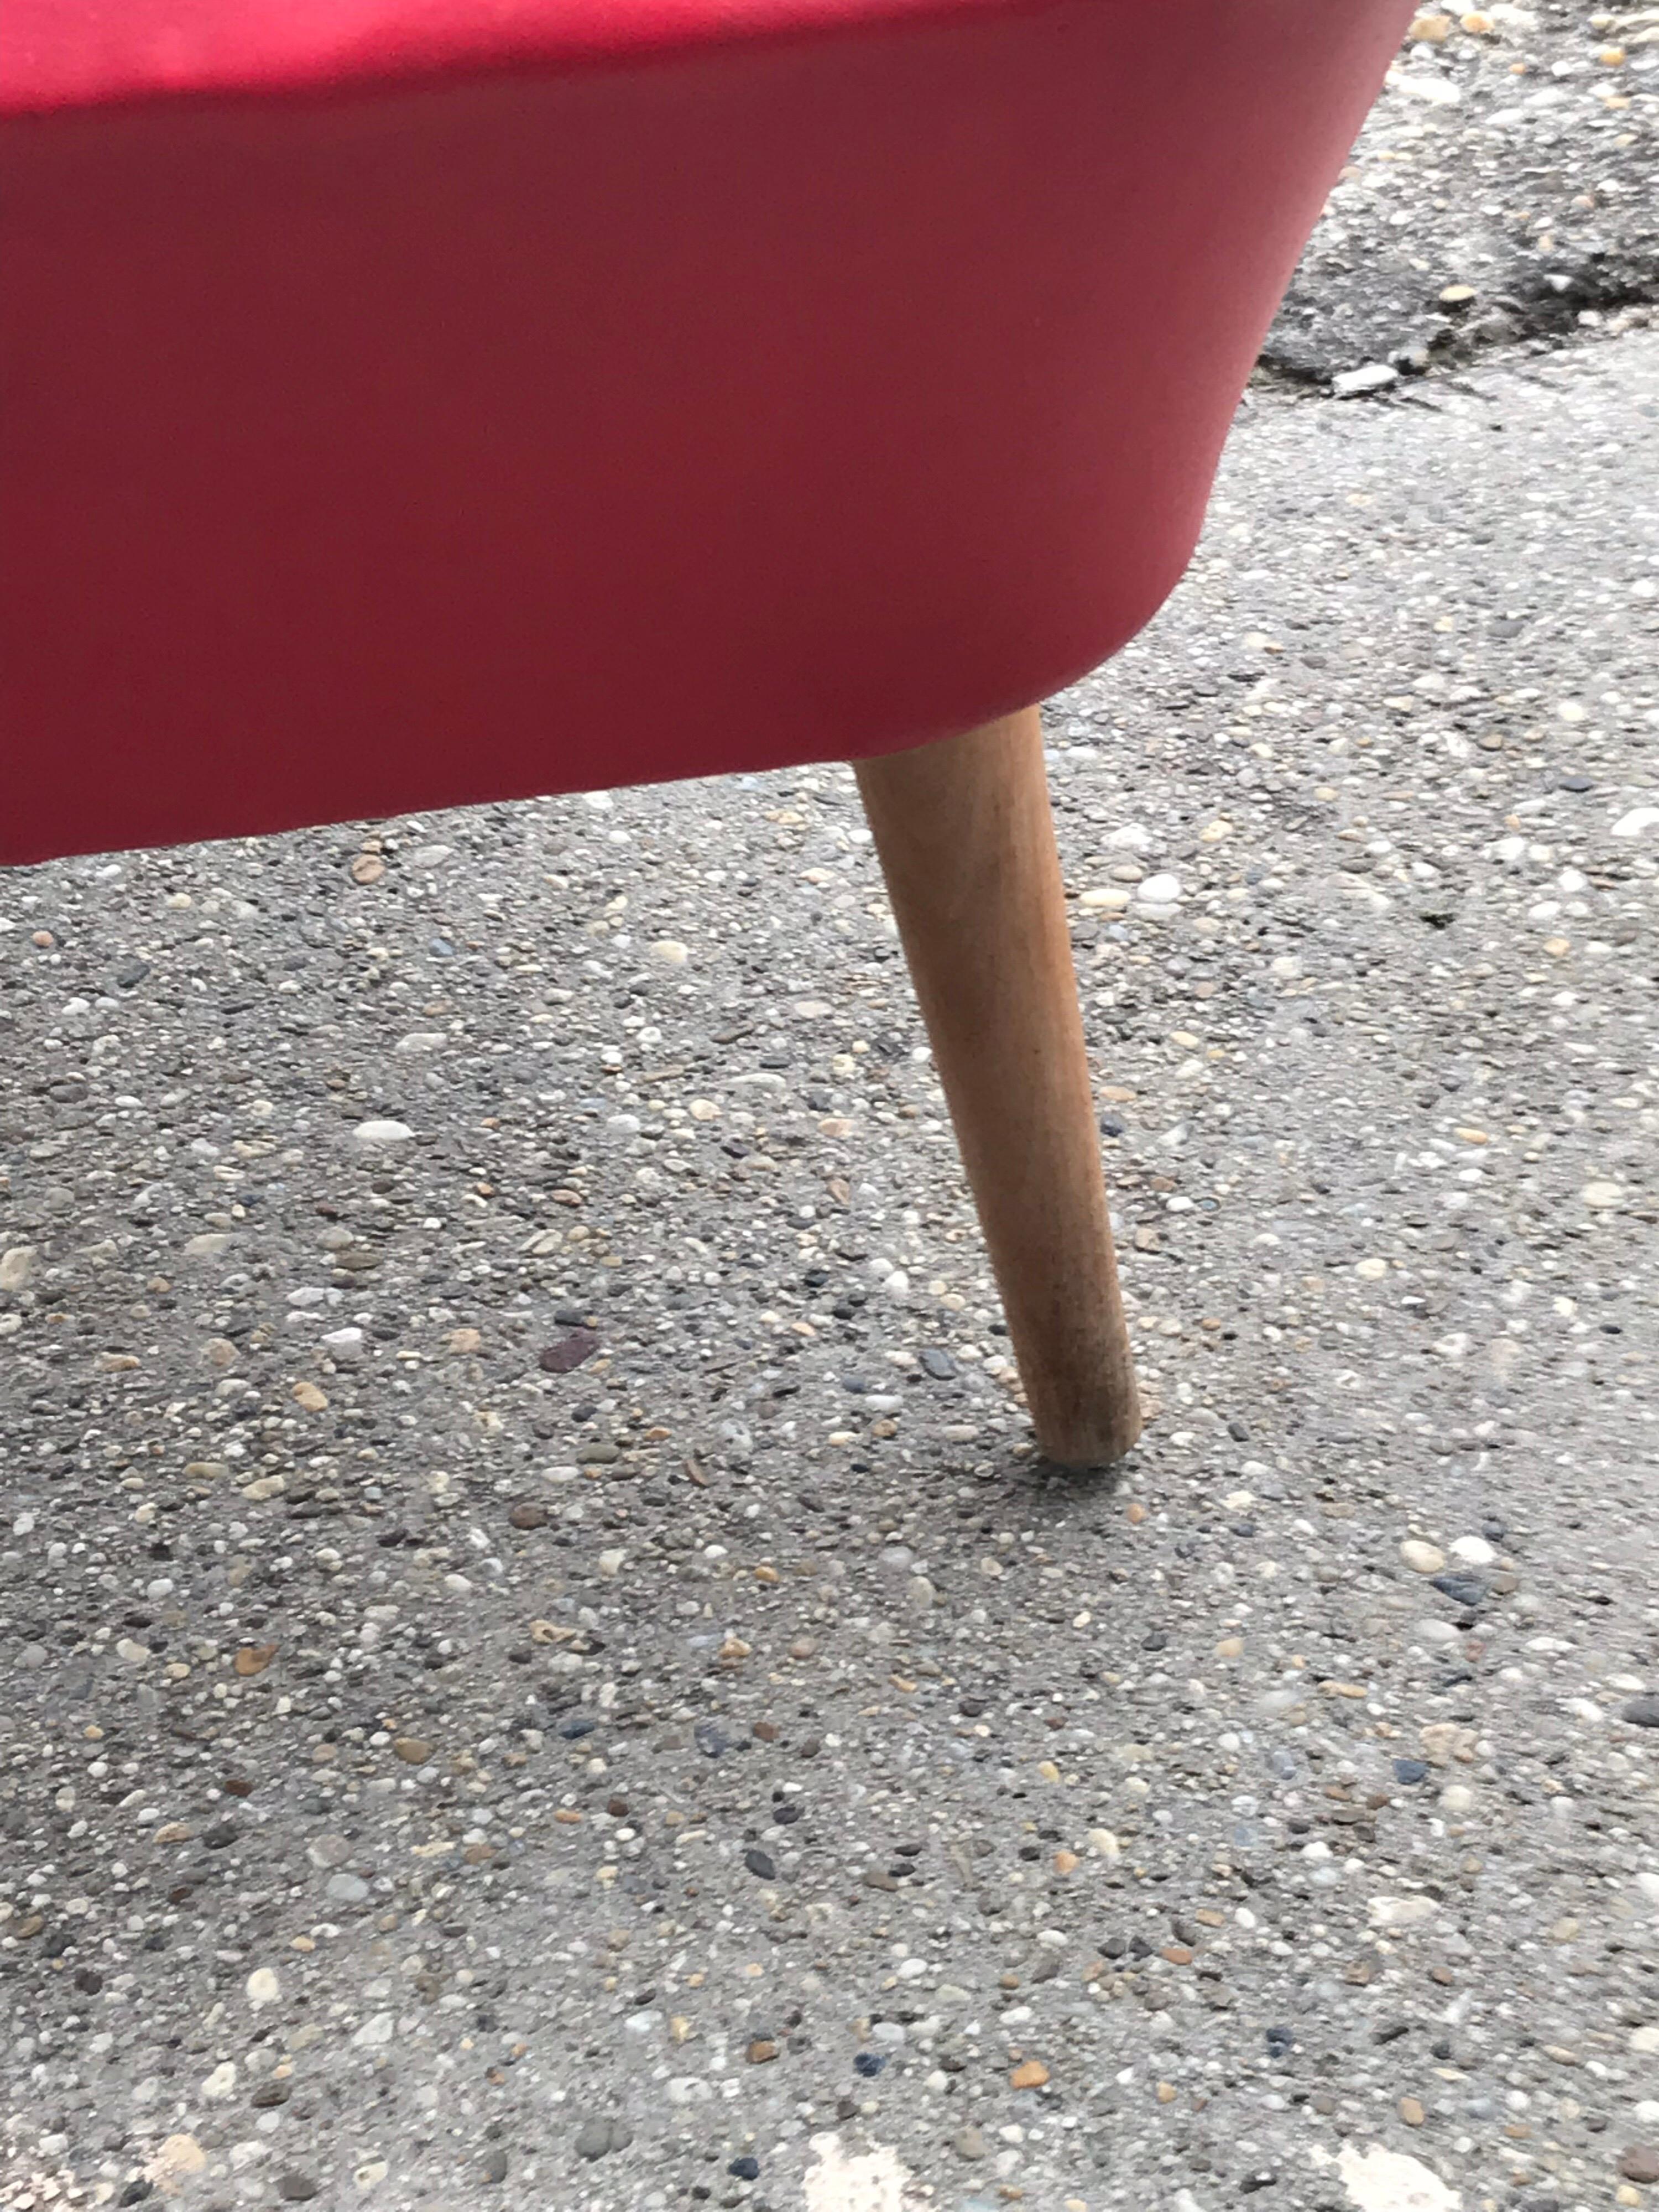 Hungarian Mid Century 1950s-1960s Original Red Cocktail Chair Armchair For Sale